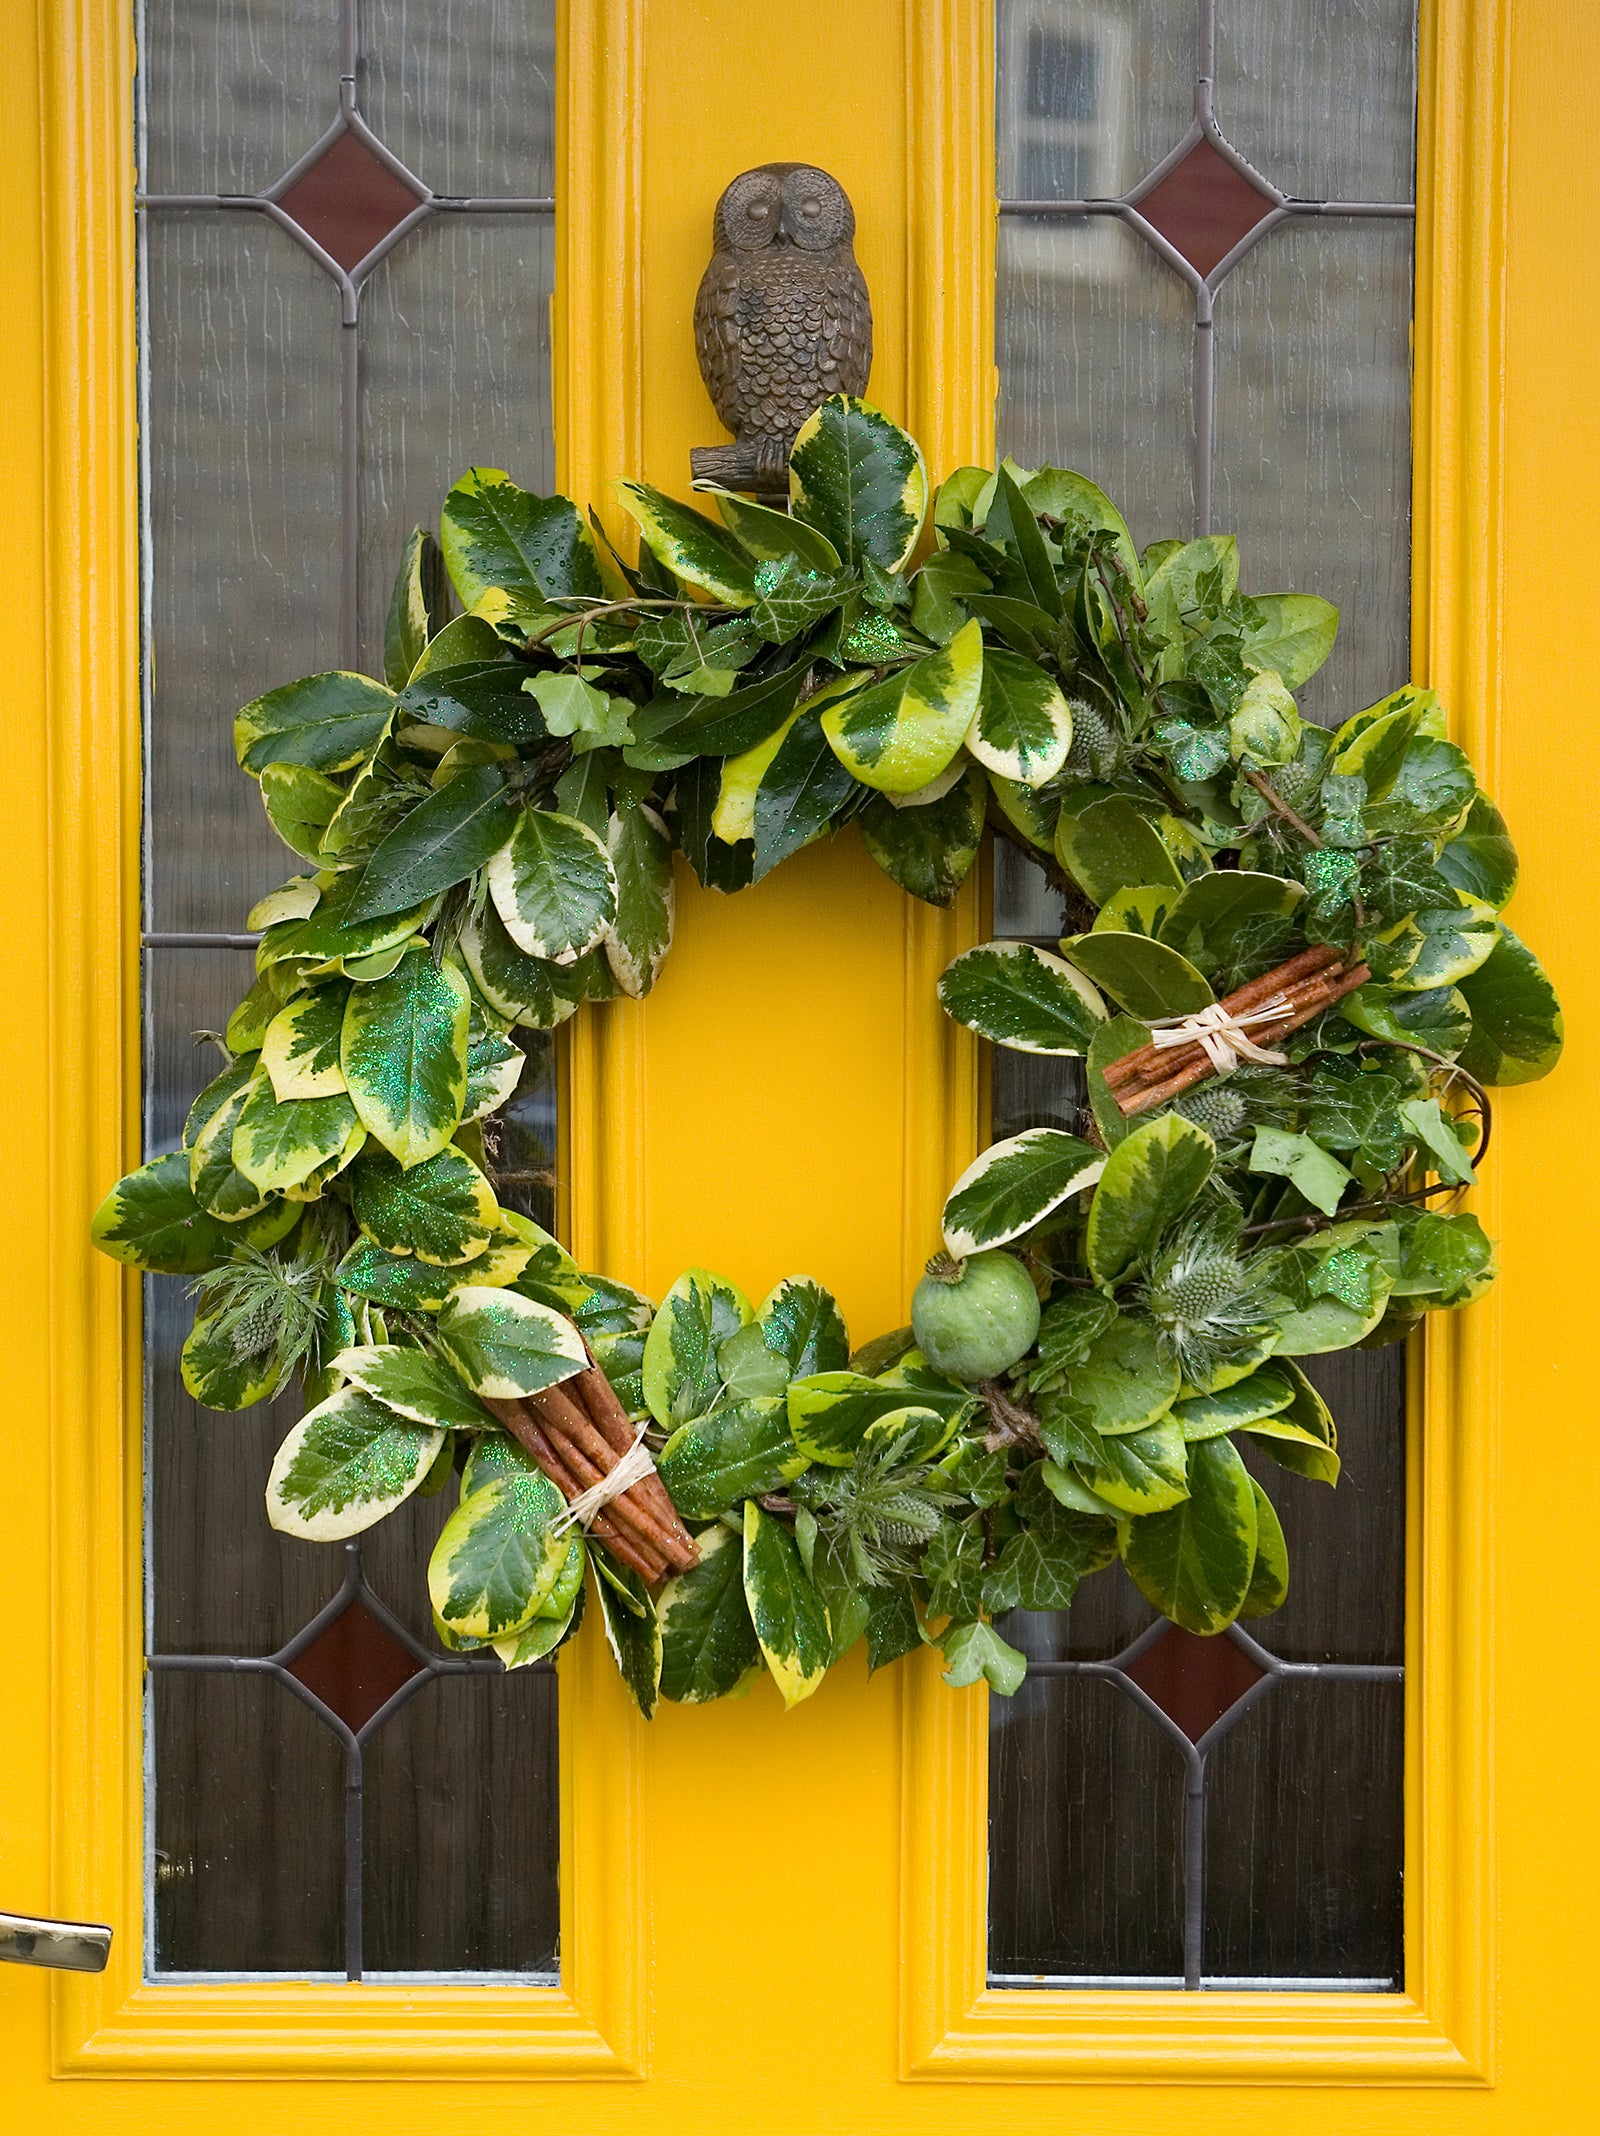 Closeup of winter wreath hanging on bright yellow front door, with frosted glass panes and owl door knocker.